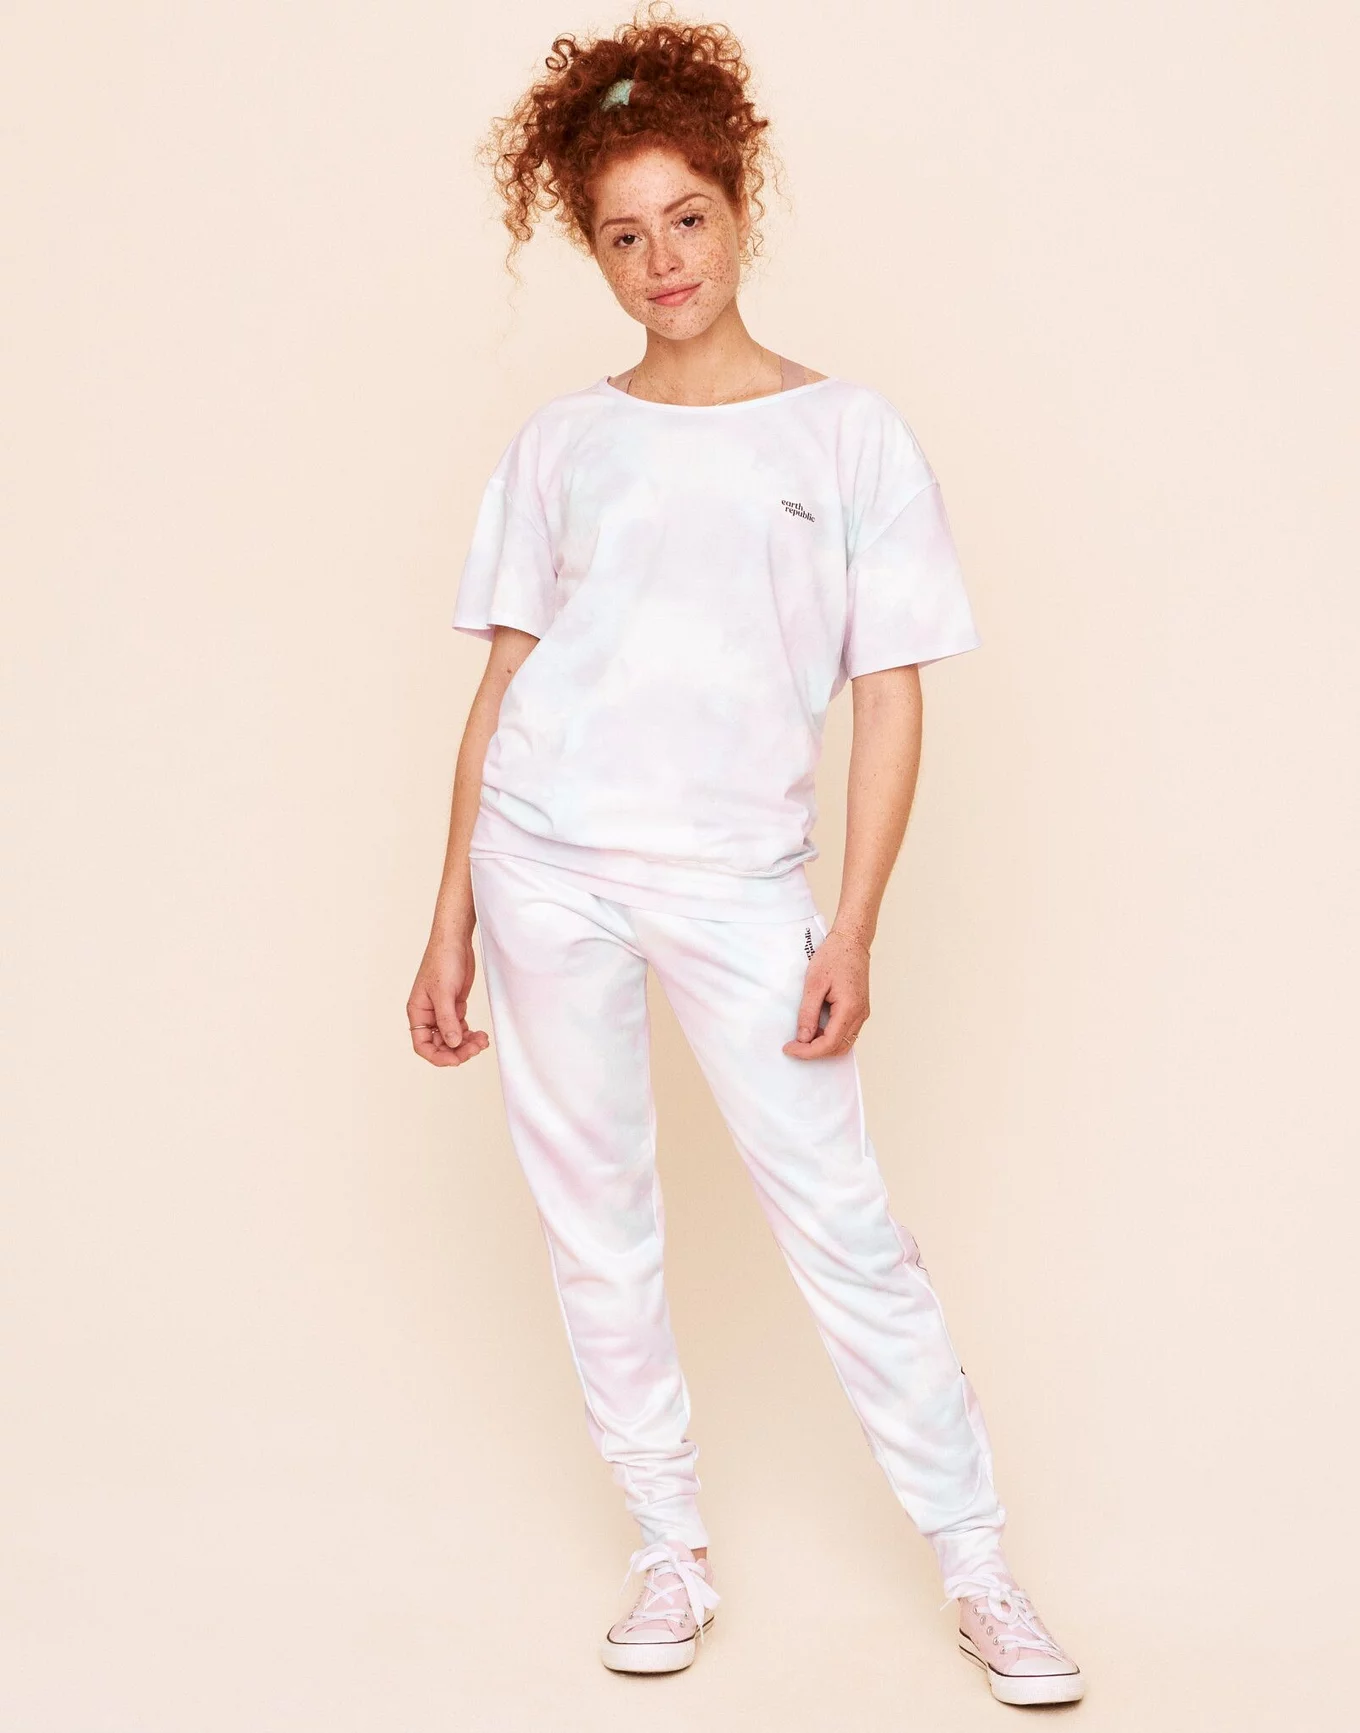 Women's Stay Lucky Graphic Joggers - White 3X